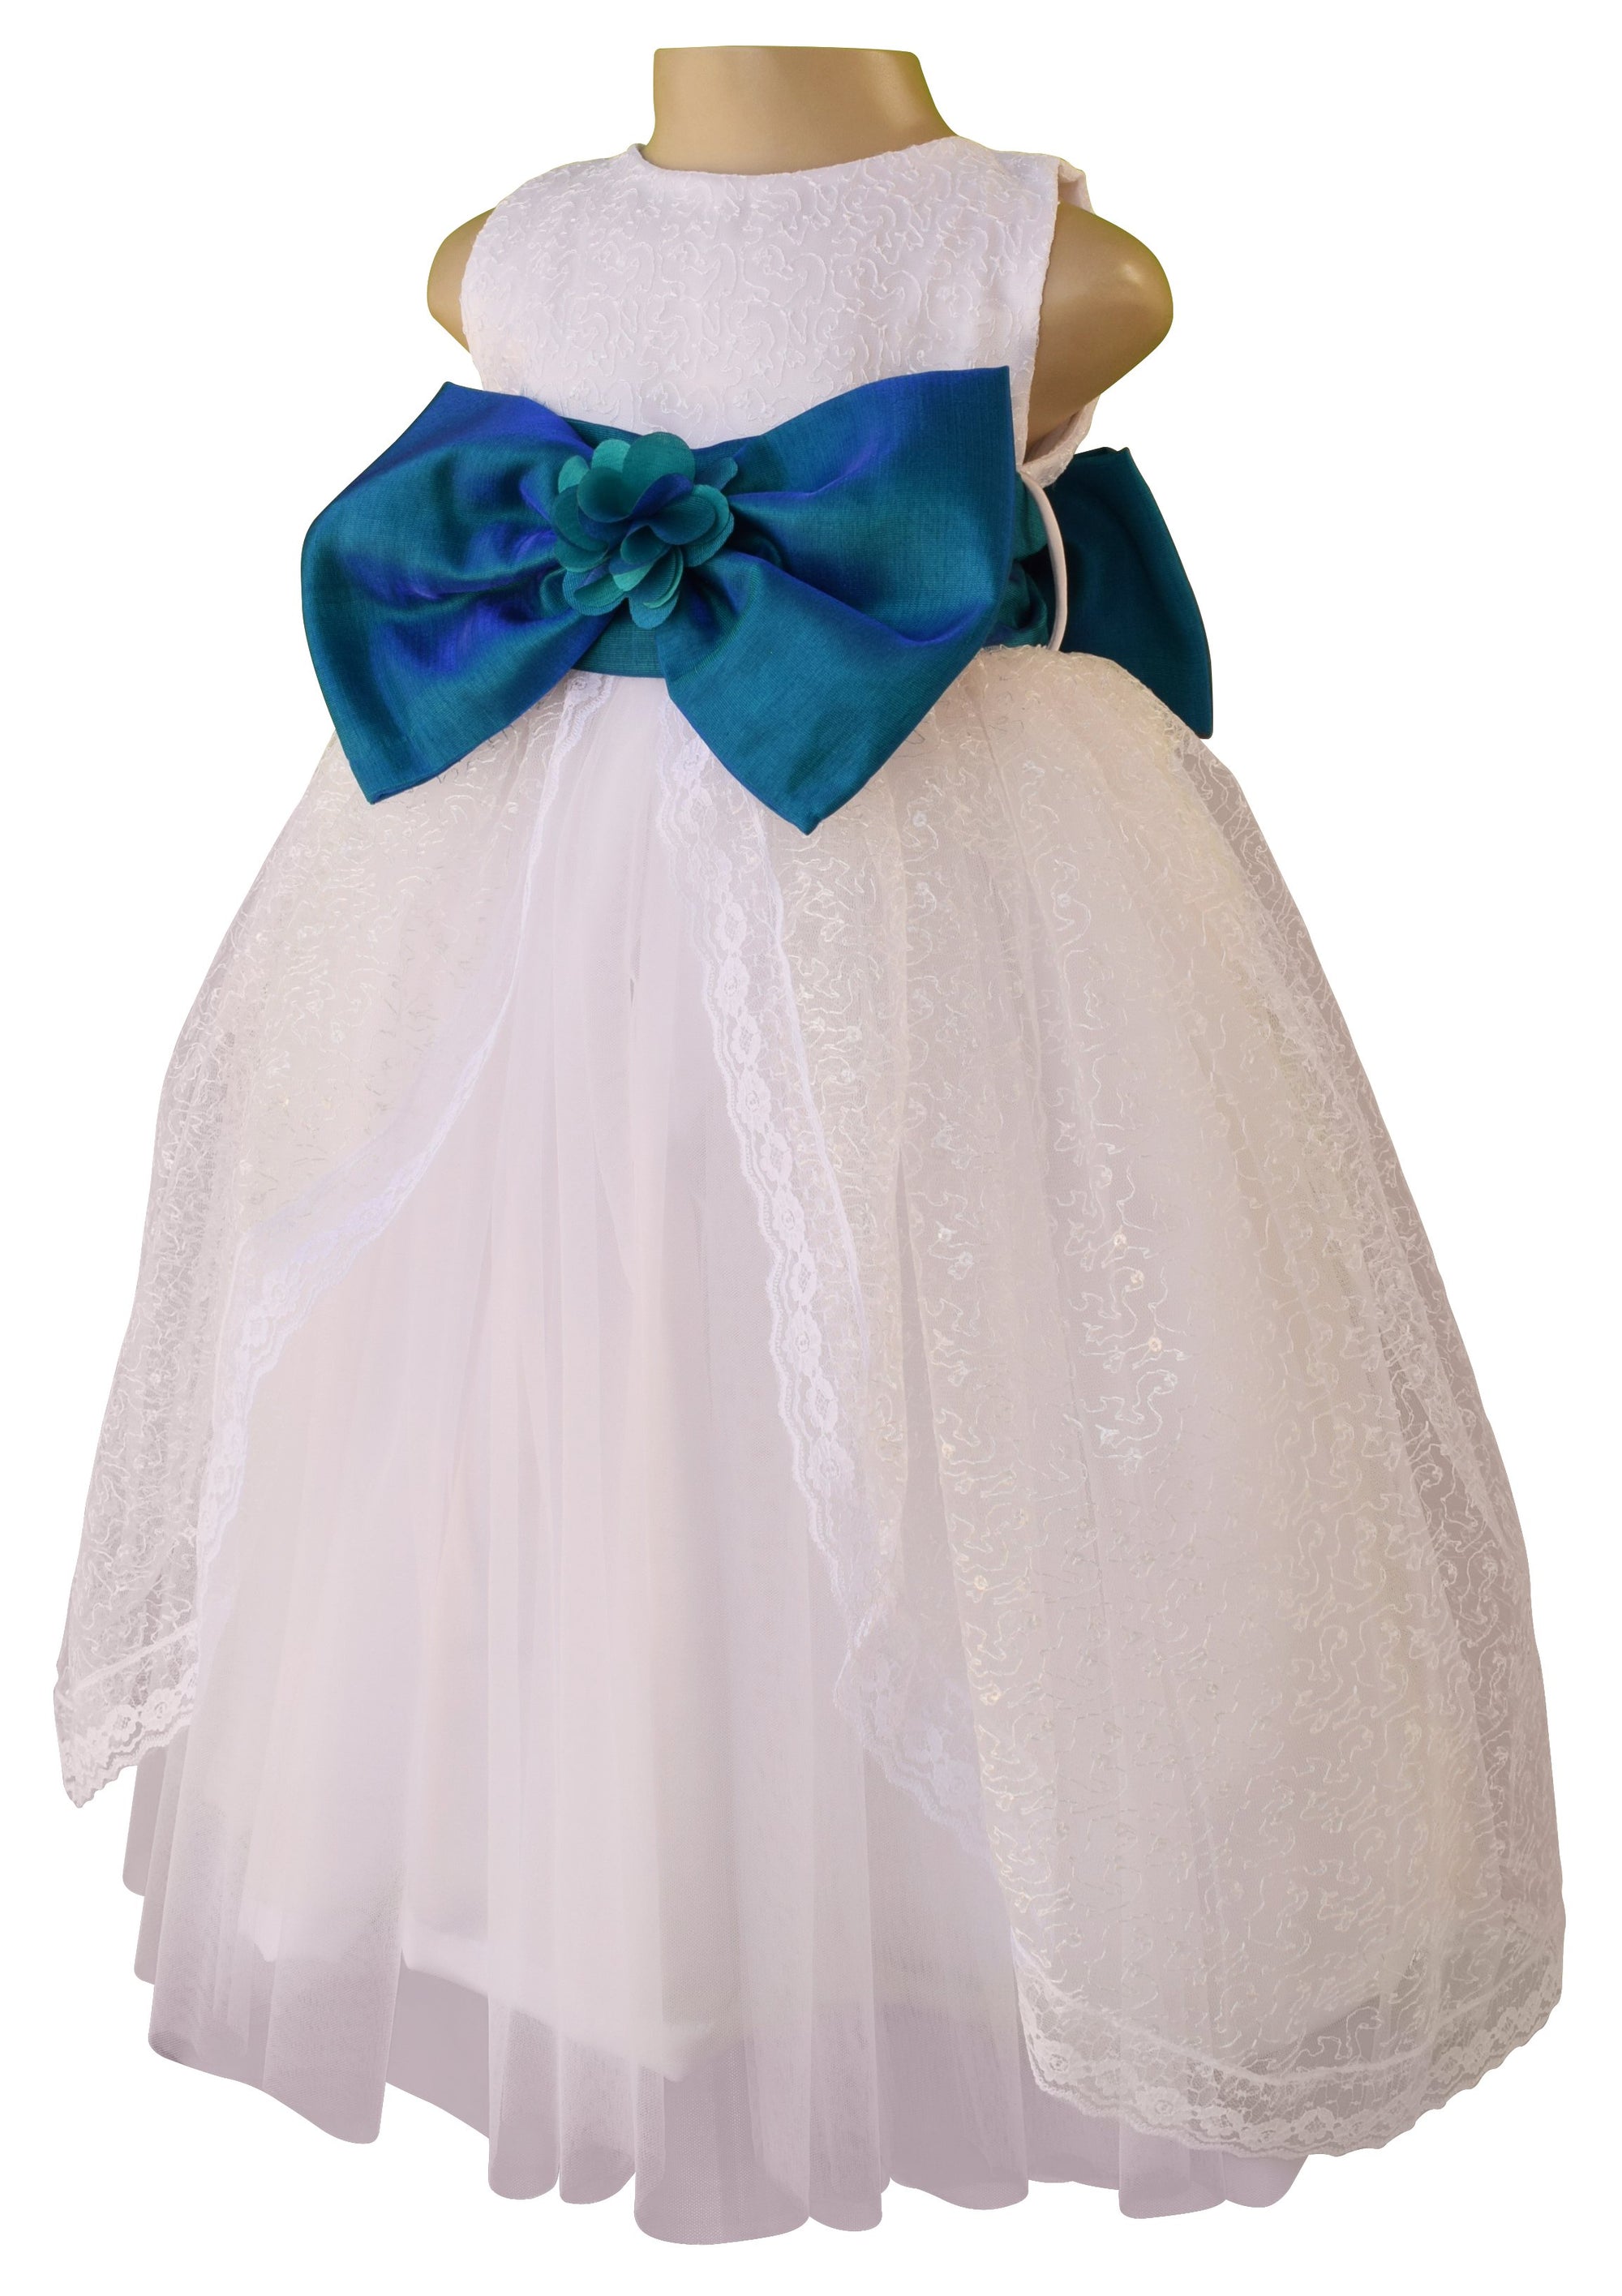 Faye White Embroidered Gown with Peacock Blue Bow & Sash